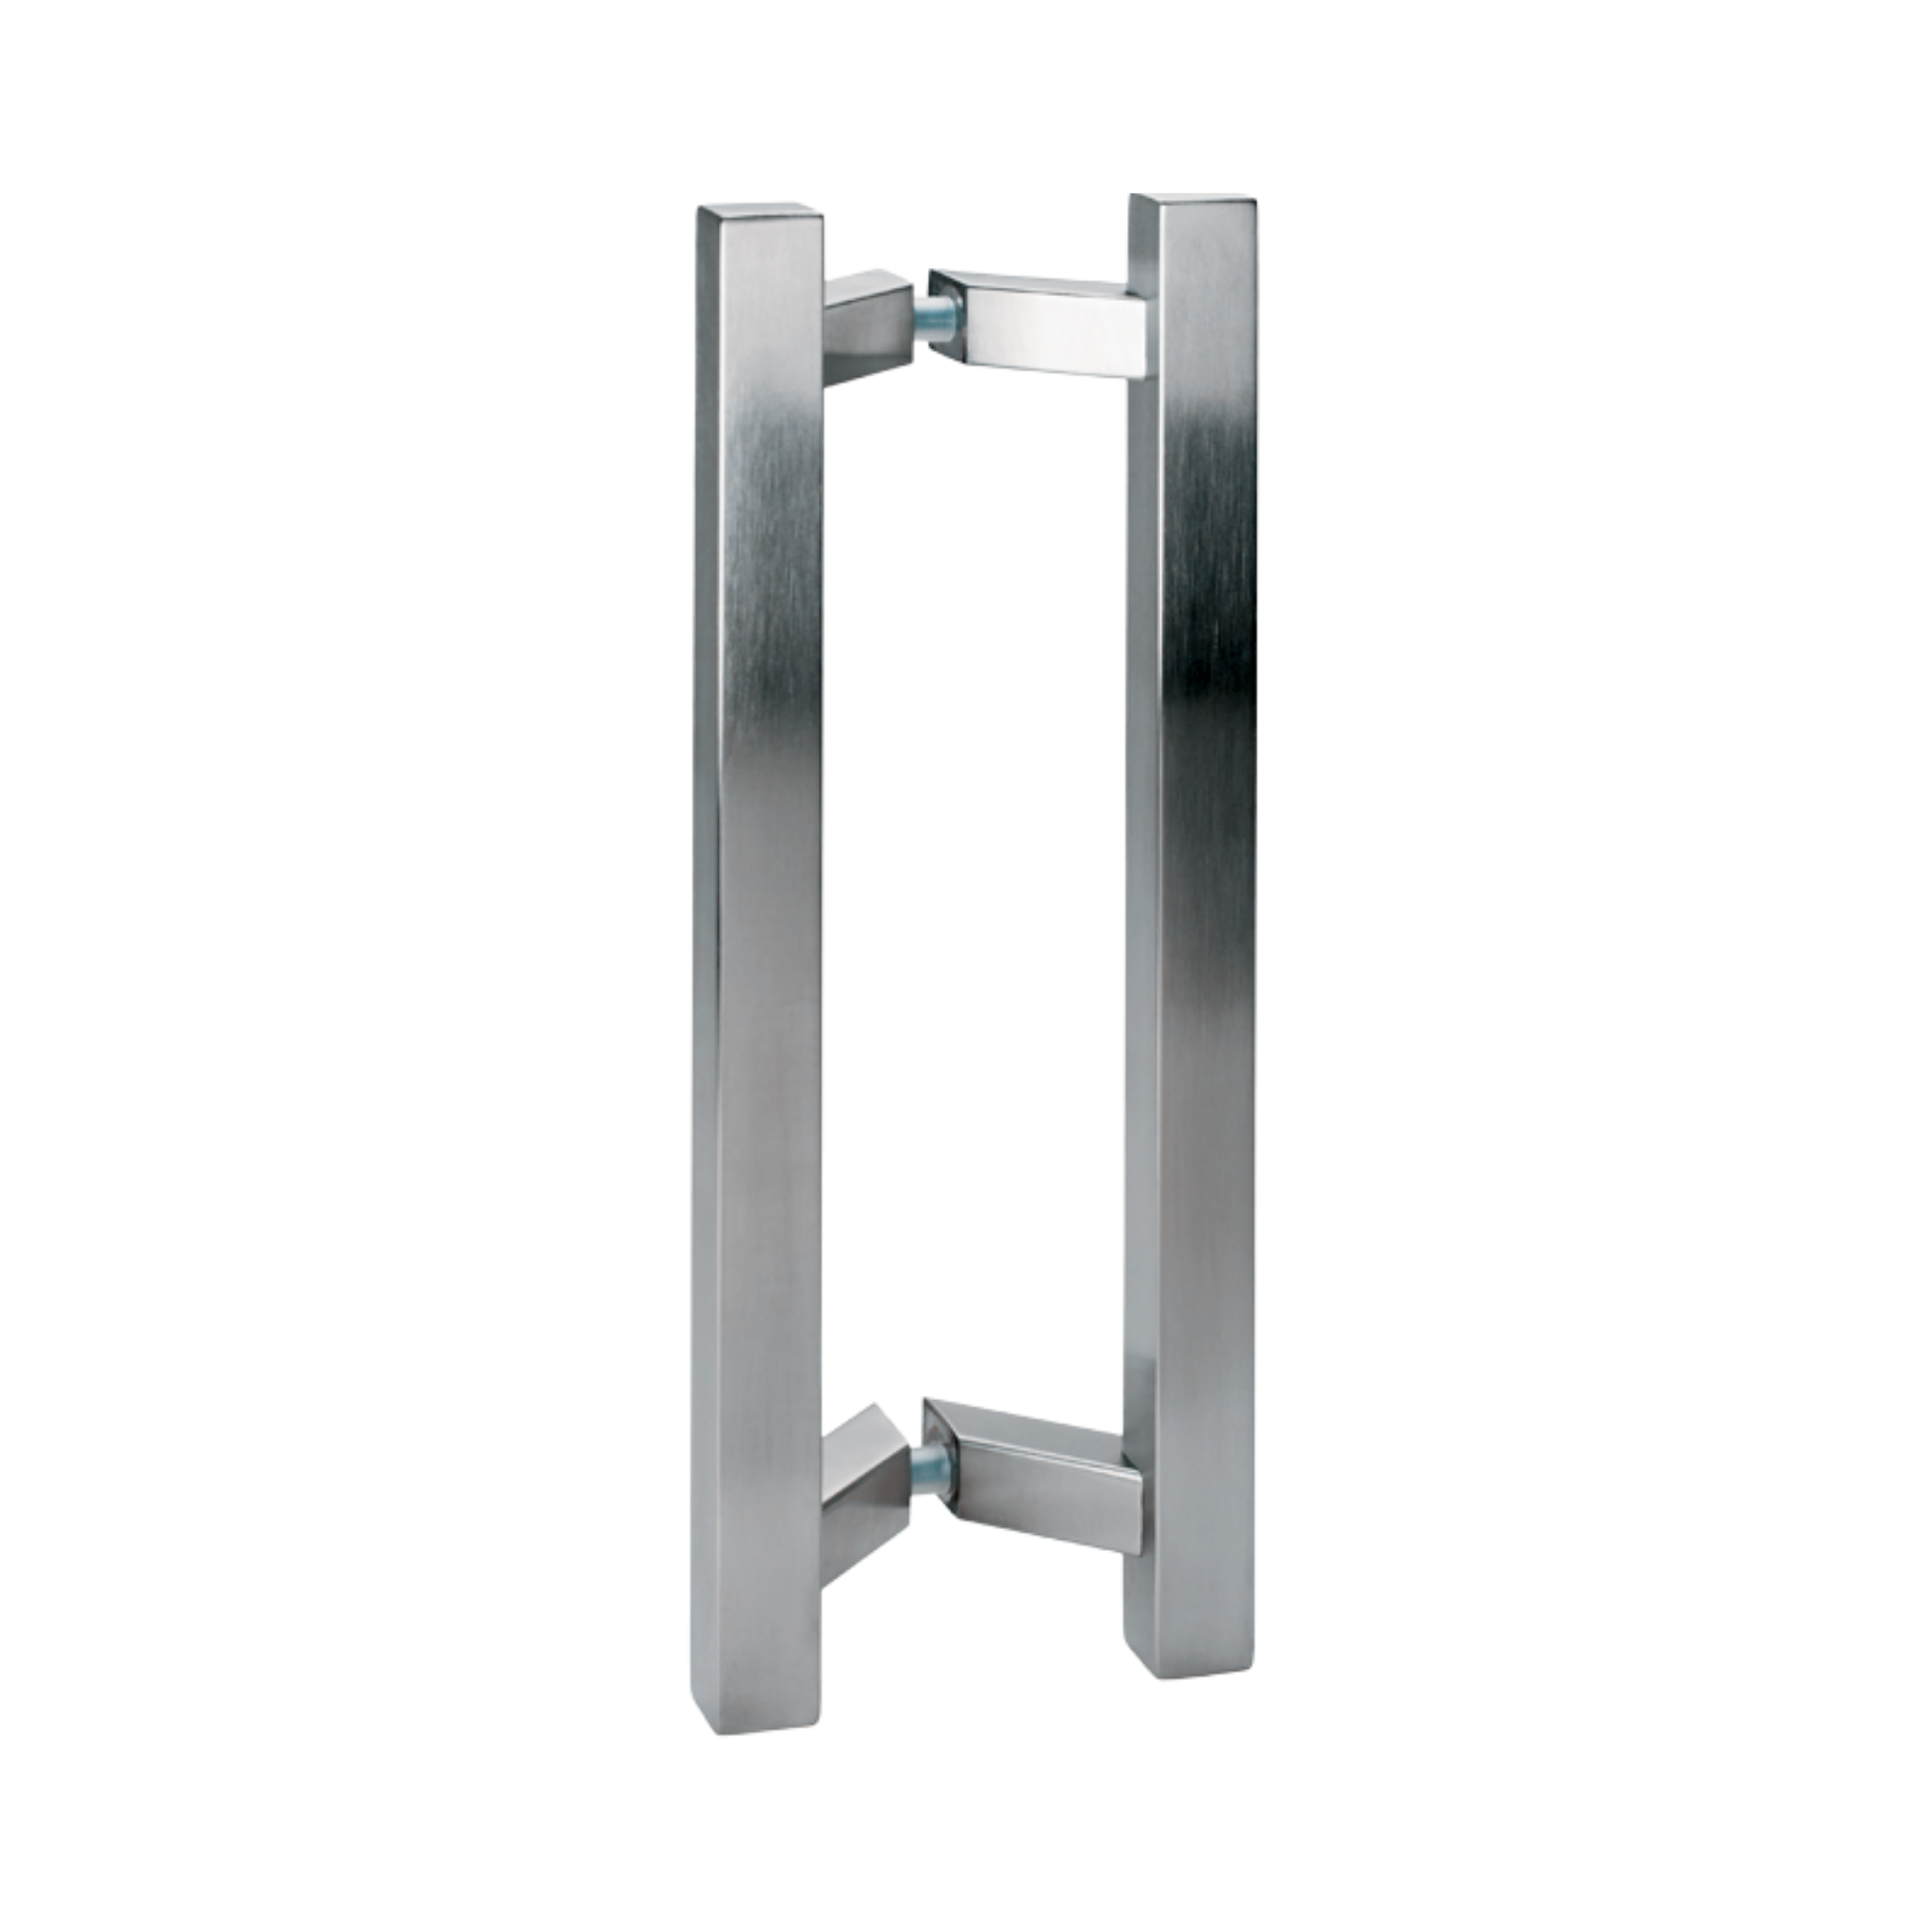 QS2704 SQ Mitred T, Pull Handle, Square, Mitred, T Handle, BTB, 25mm (d) x 375mm (l) x 300mm (ctc), Stainless Steel, QS